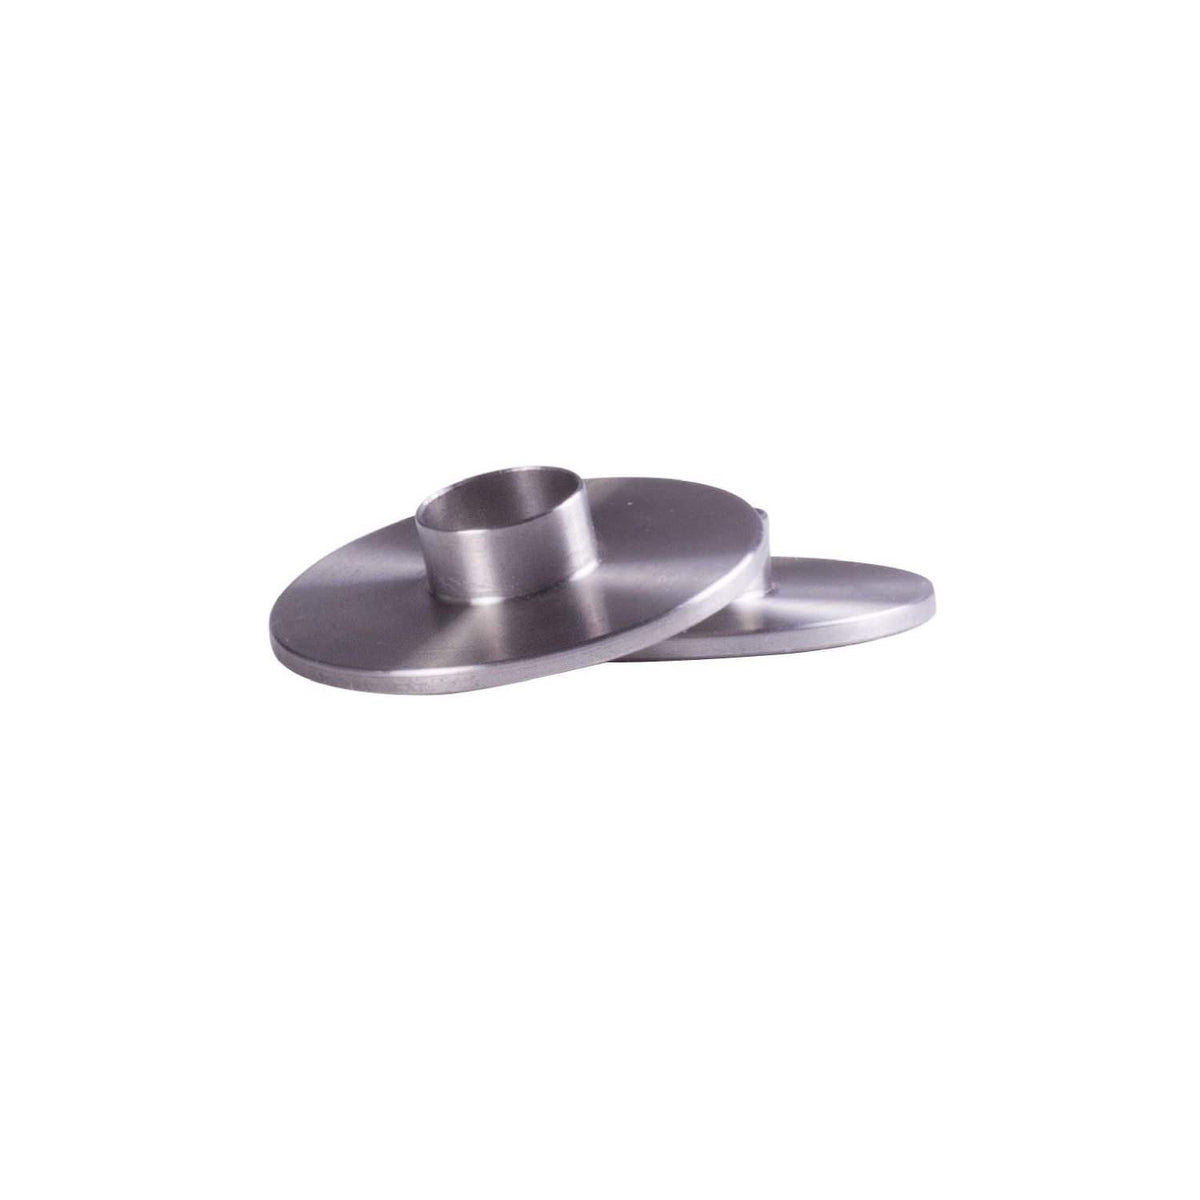 Buzzed Amish Precision Flat & Cupped Washers [2 Washers]